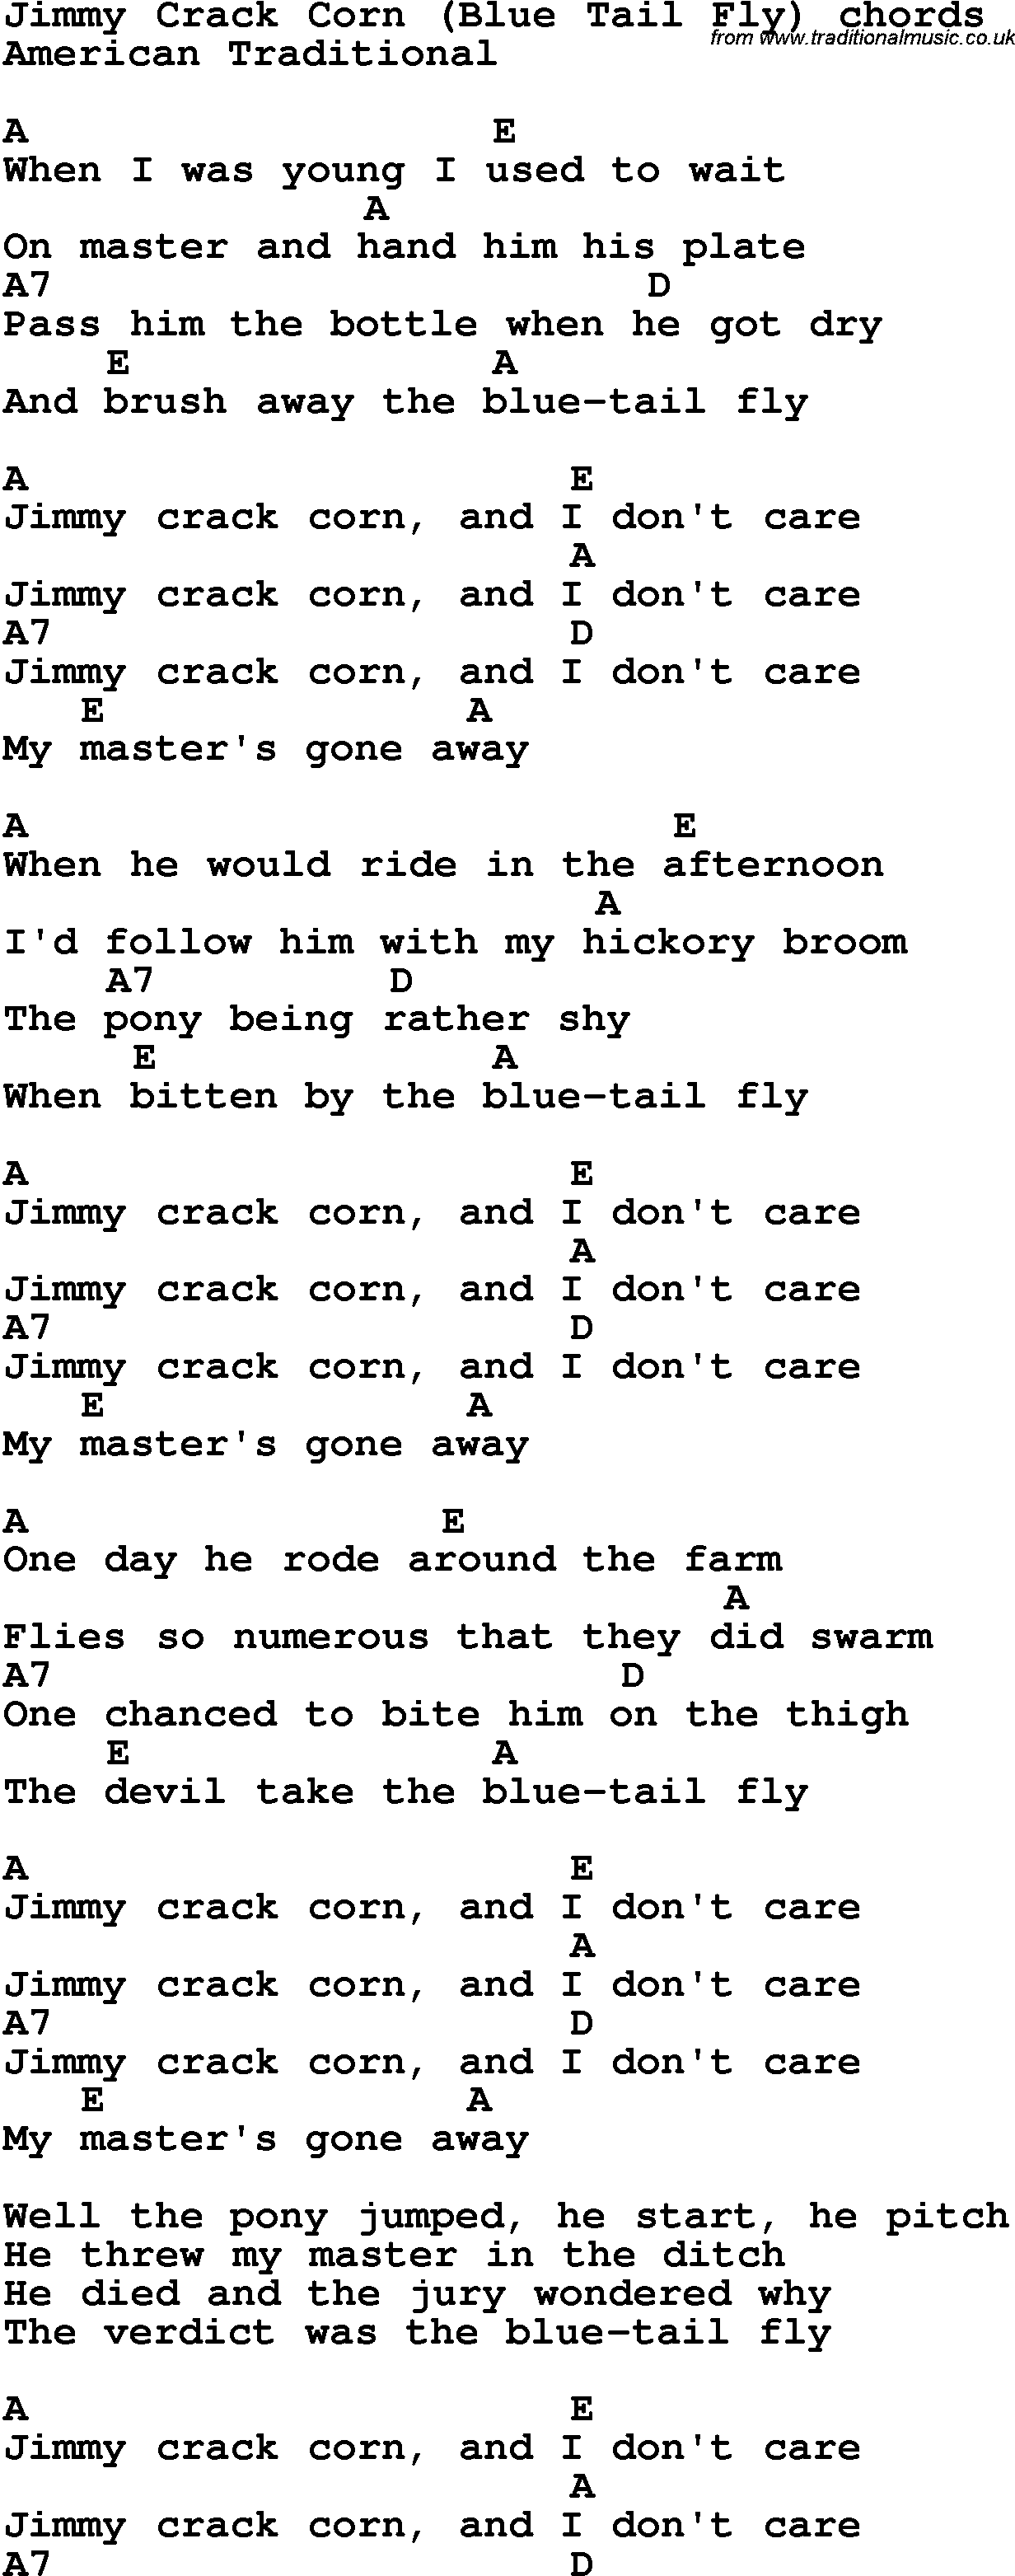 Song Lyrics with guitar chords for Jimmy Crack Corn